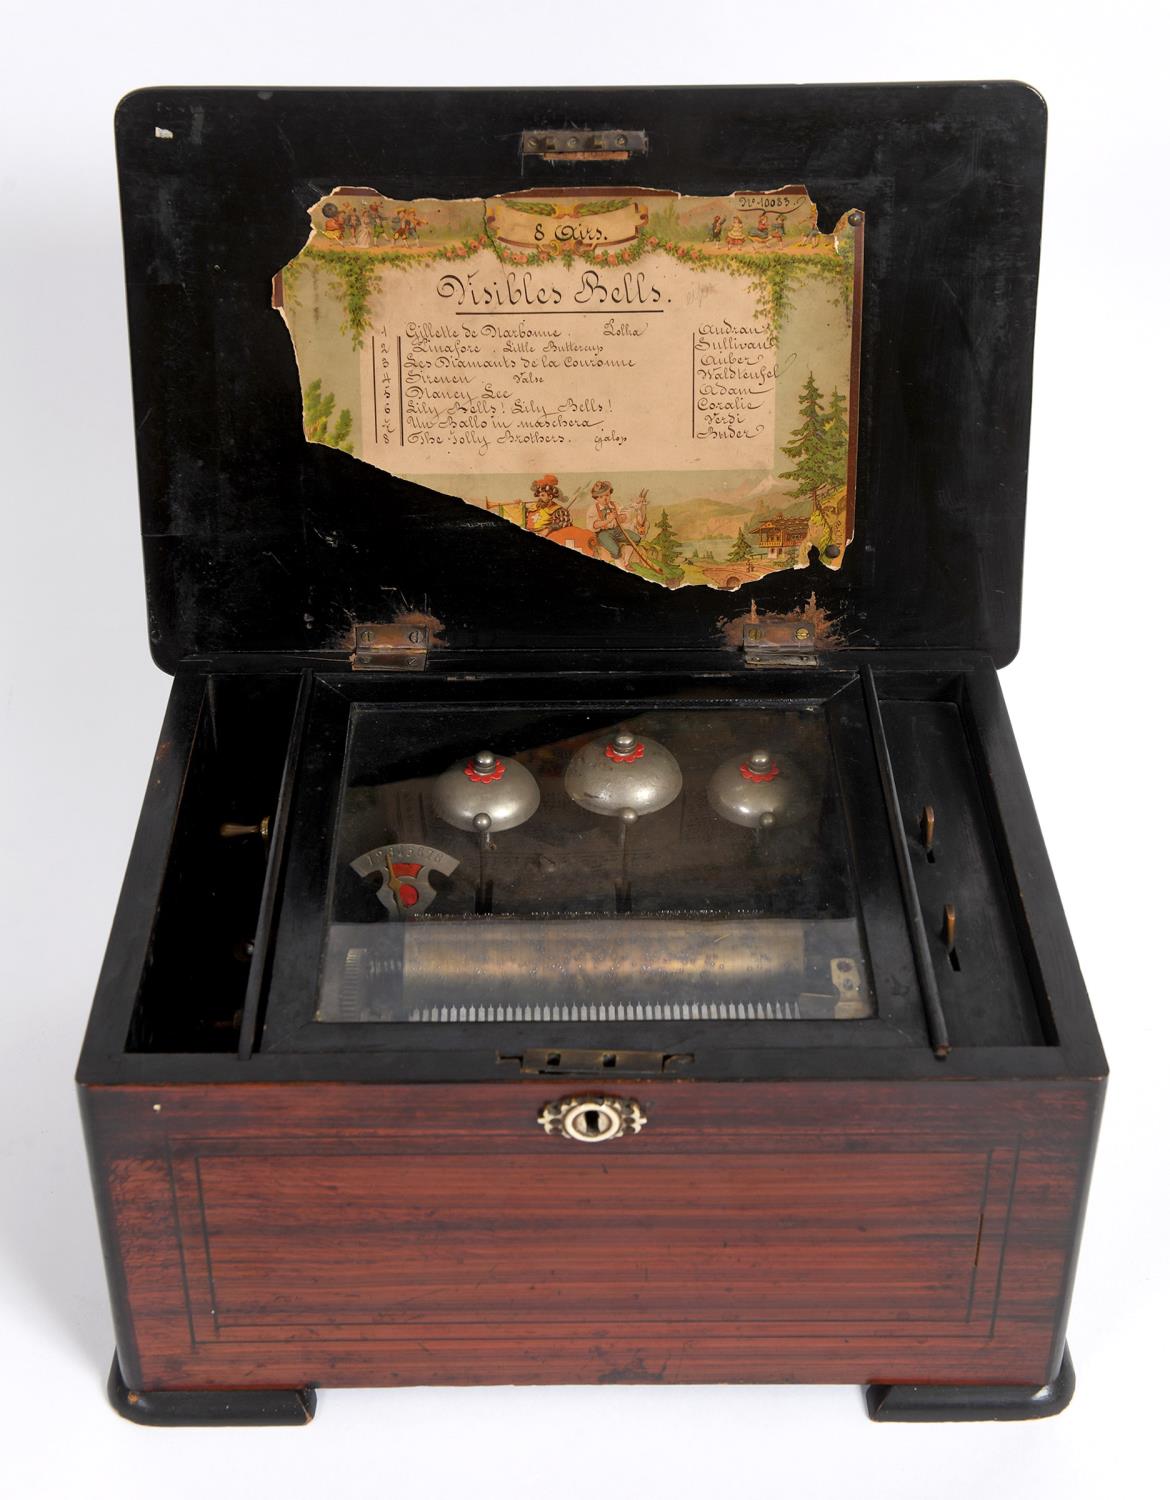 VICTORIAN MUSIC BOX - 8 AIRS a musical box with an 8 air movement and striking on 3 bells, with